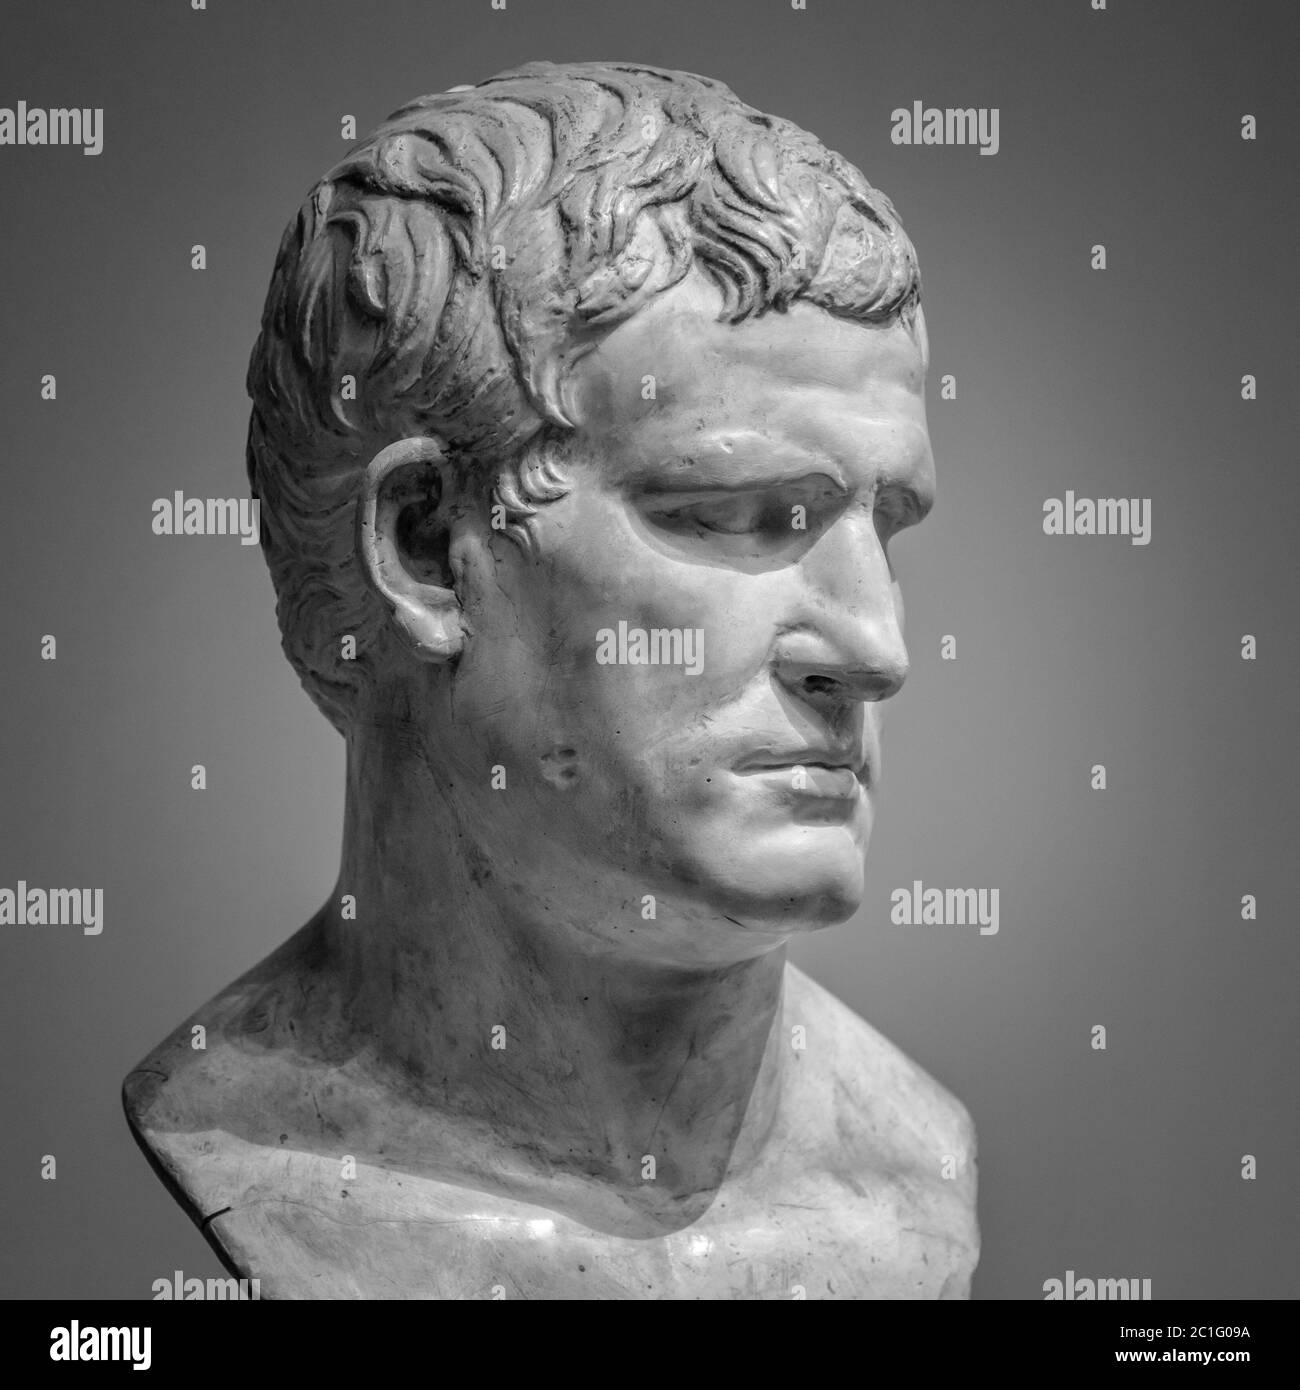 The ancient marble head of man sculpture Stock Photo